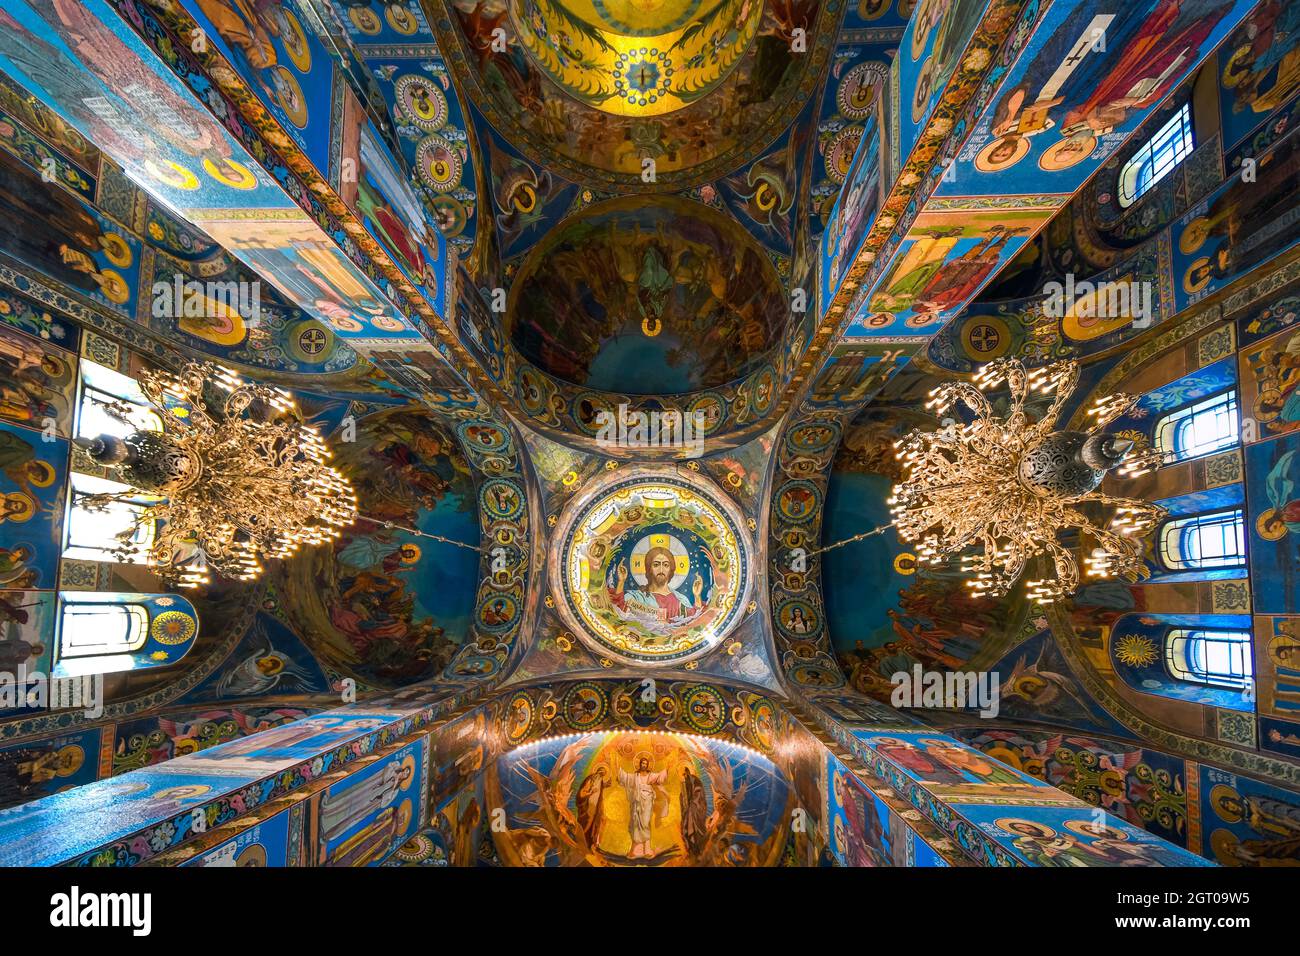 The ceiling, columns and walls covered in mosaics depicting religious scenes inside the Church of Our Savior on Spilled Blood, Saint Petersburg Russia Stock Photo